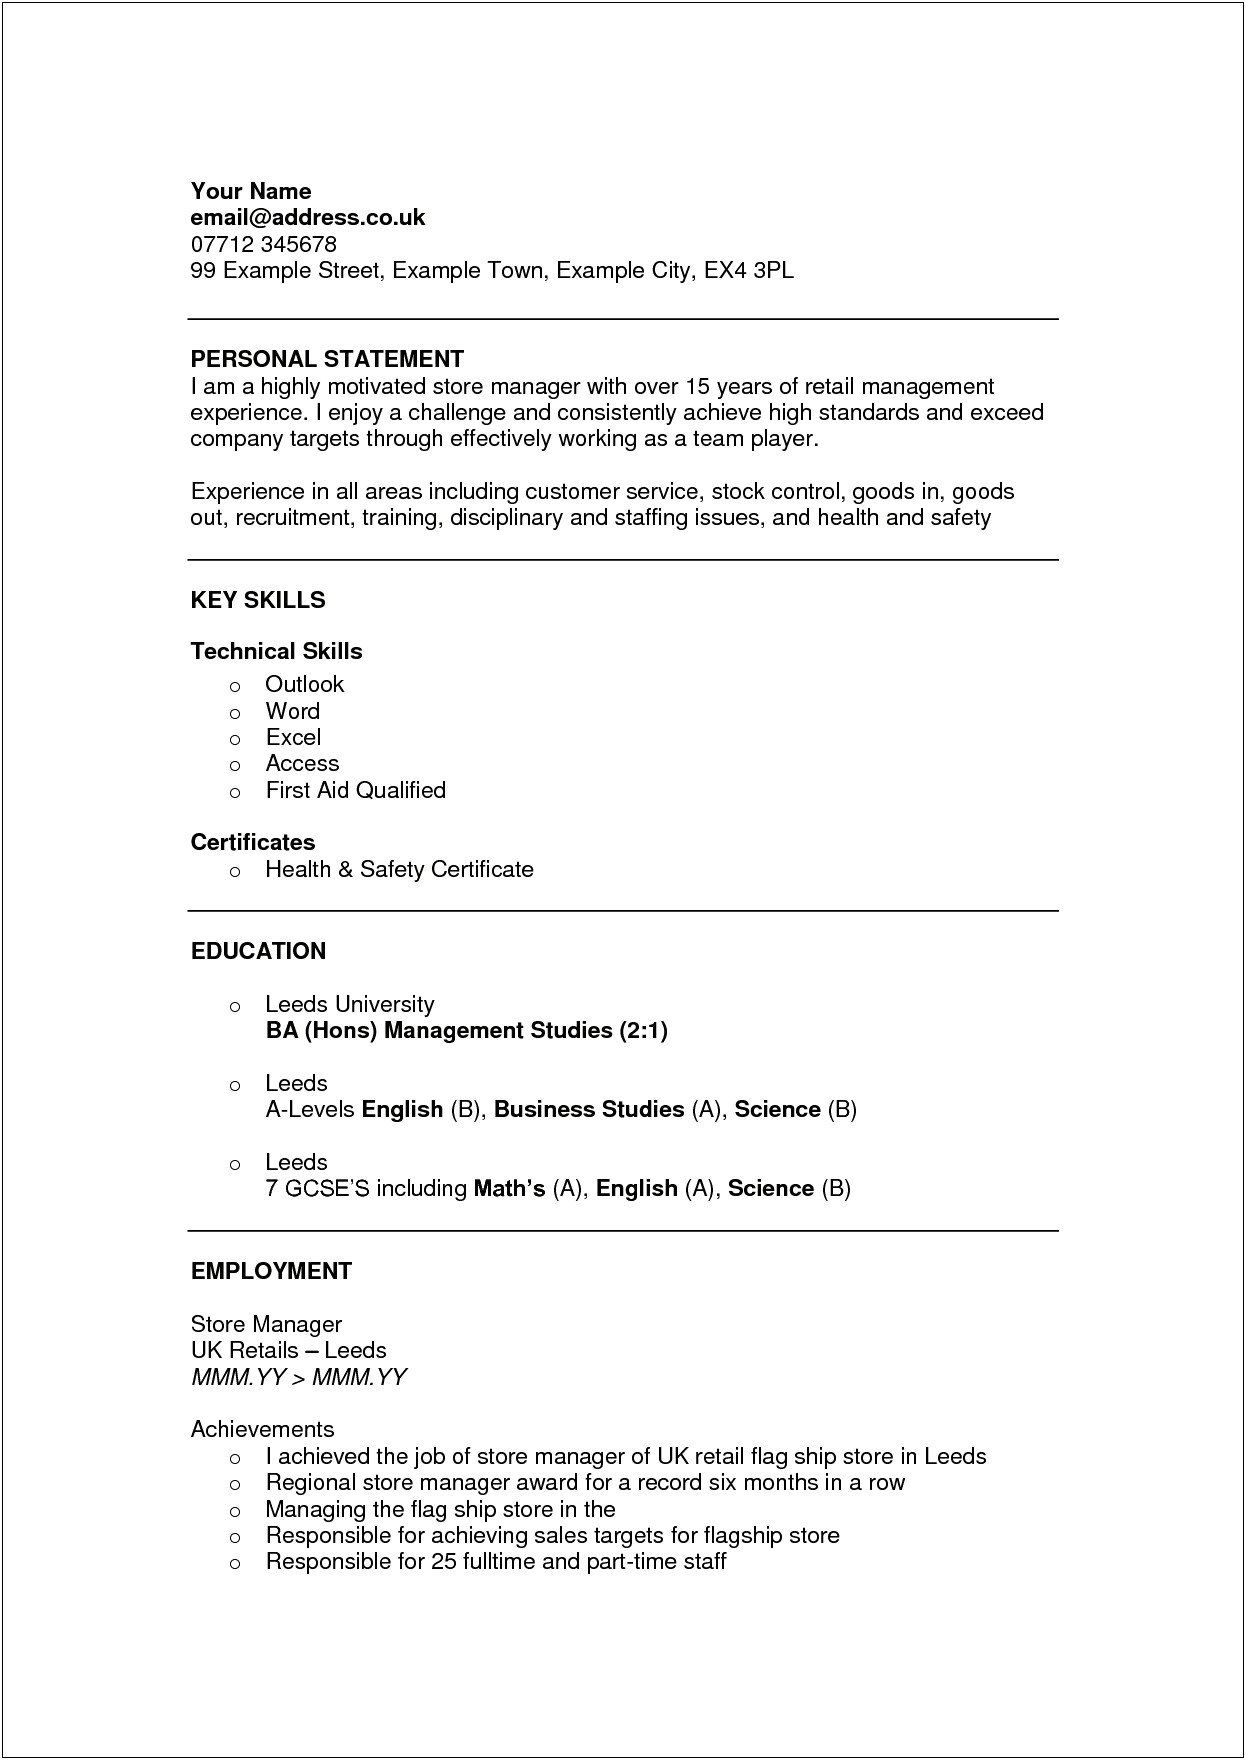 Personal Statement In Resume Examples